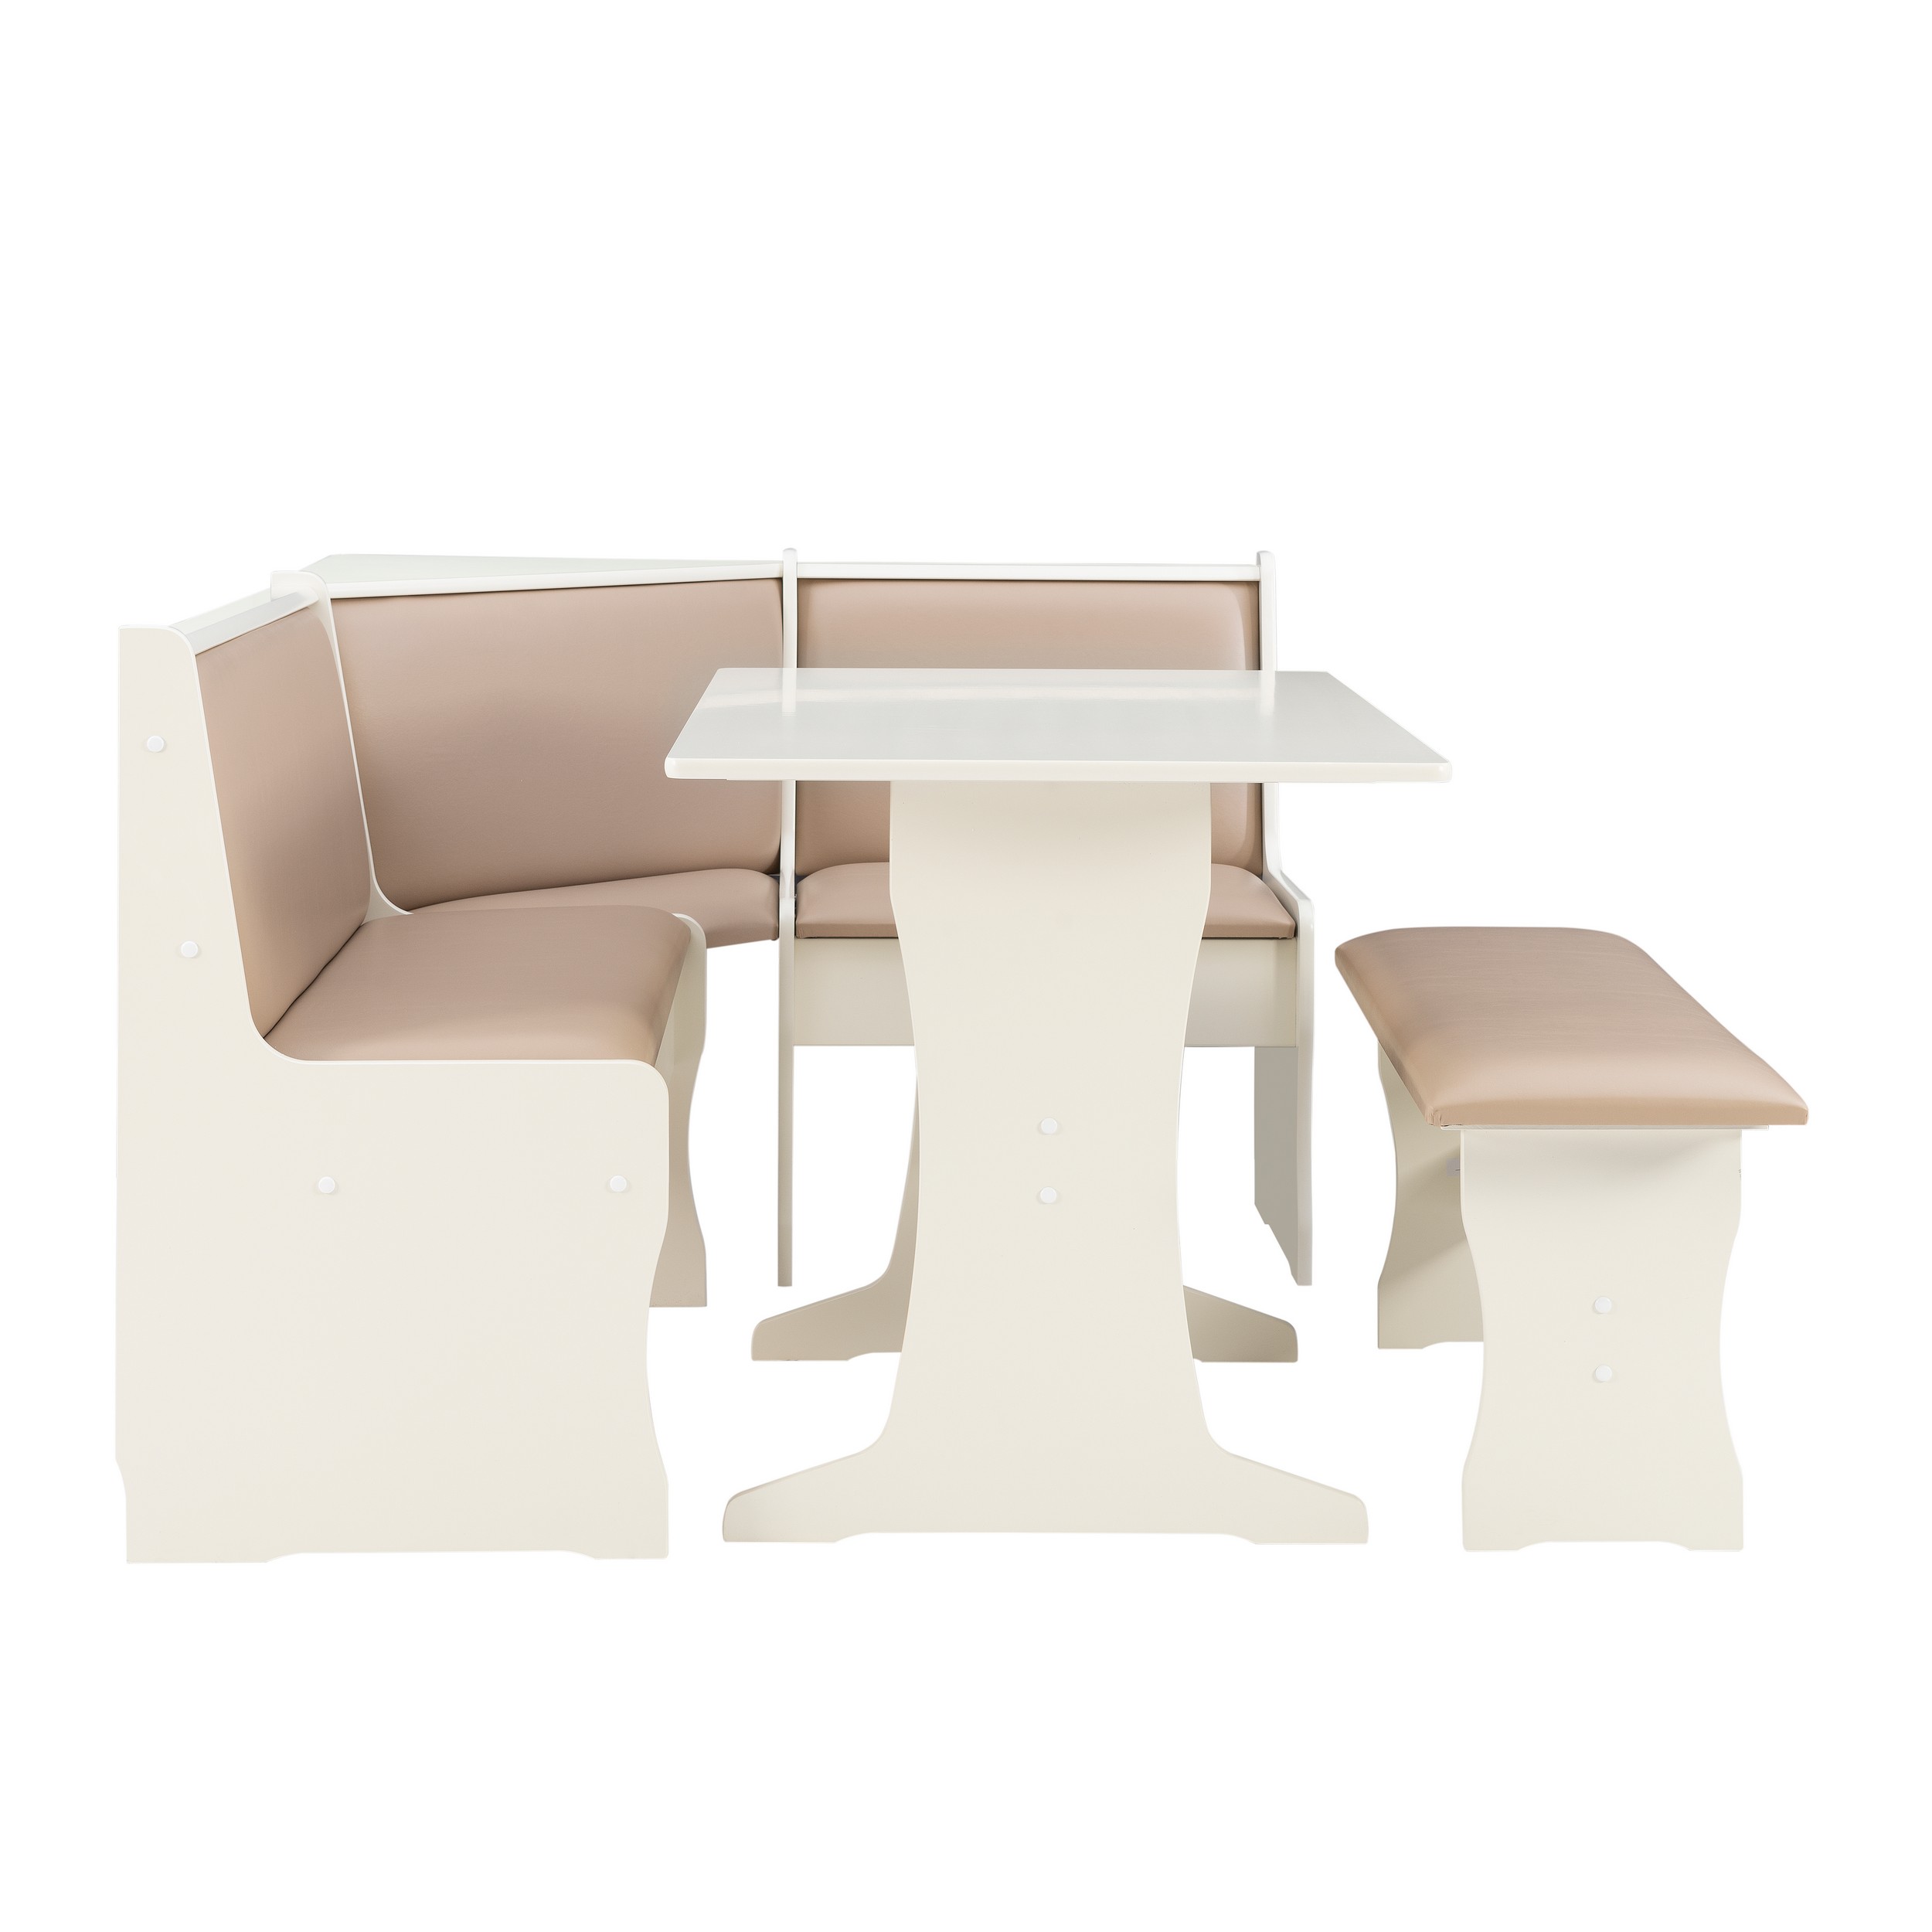 Linon Stella Dining Nook, Table, and Bench Set with Storage, Seats 5, Tan/Tan - image 5 of 19